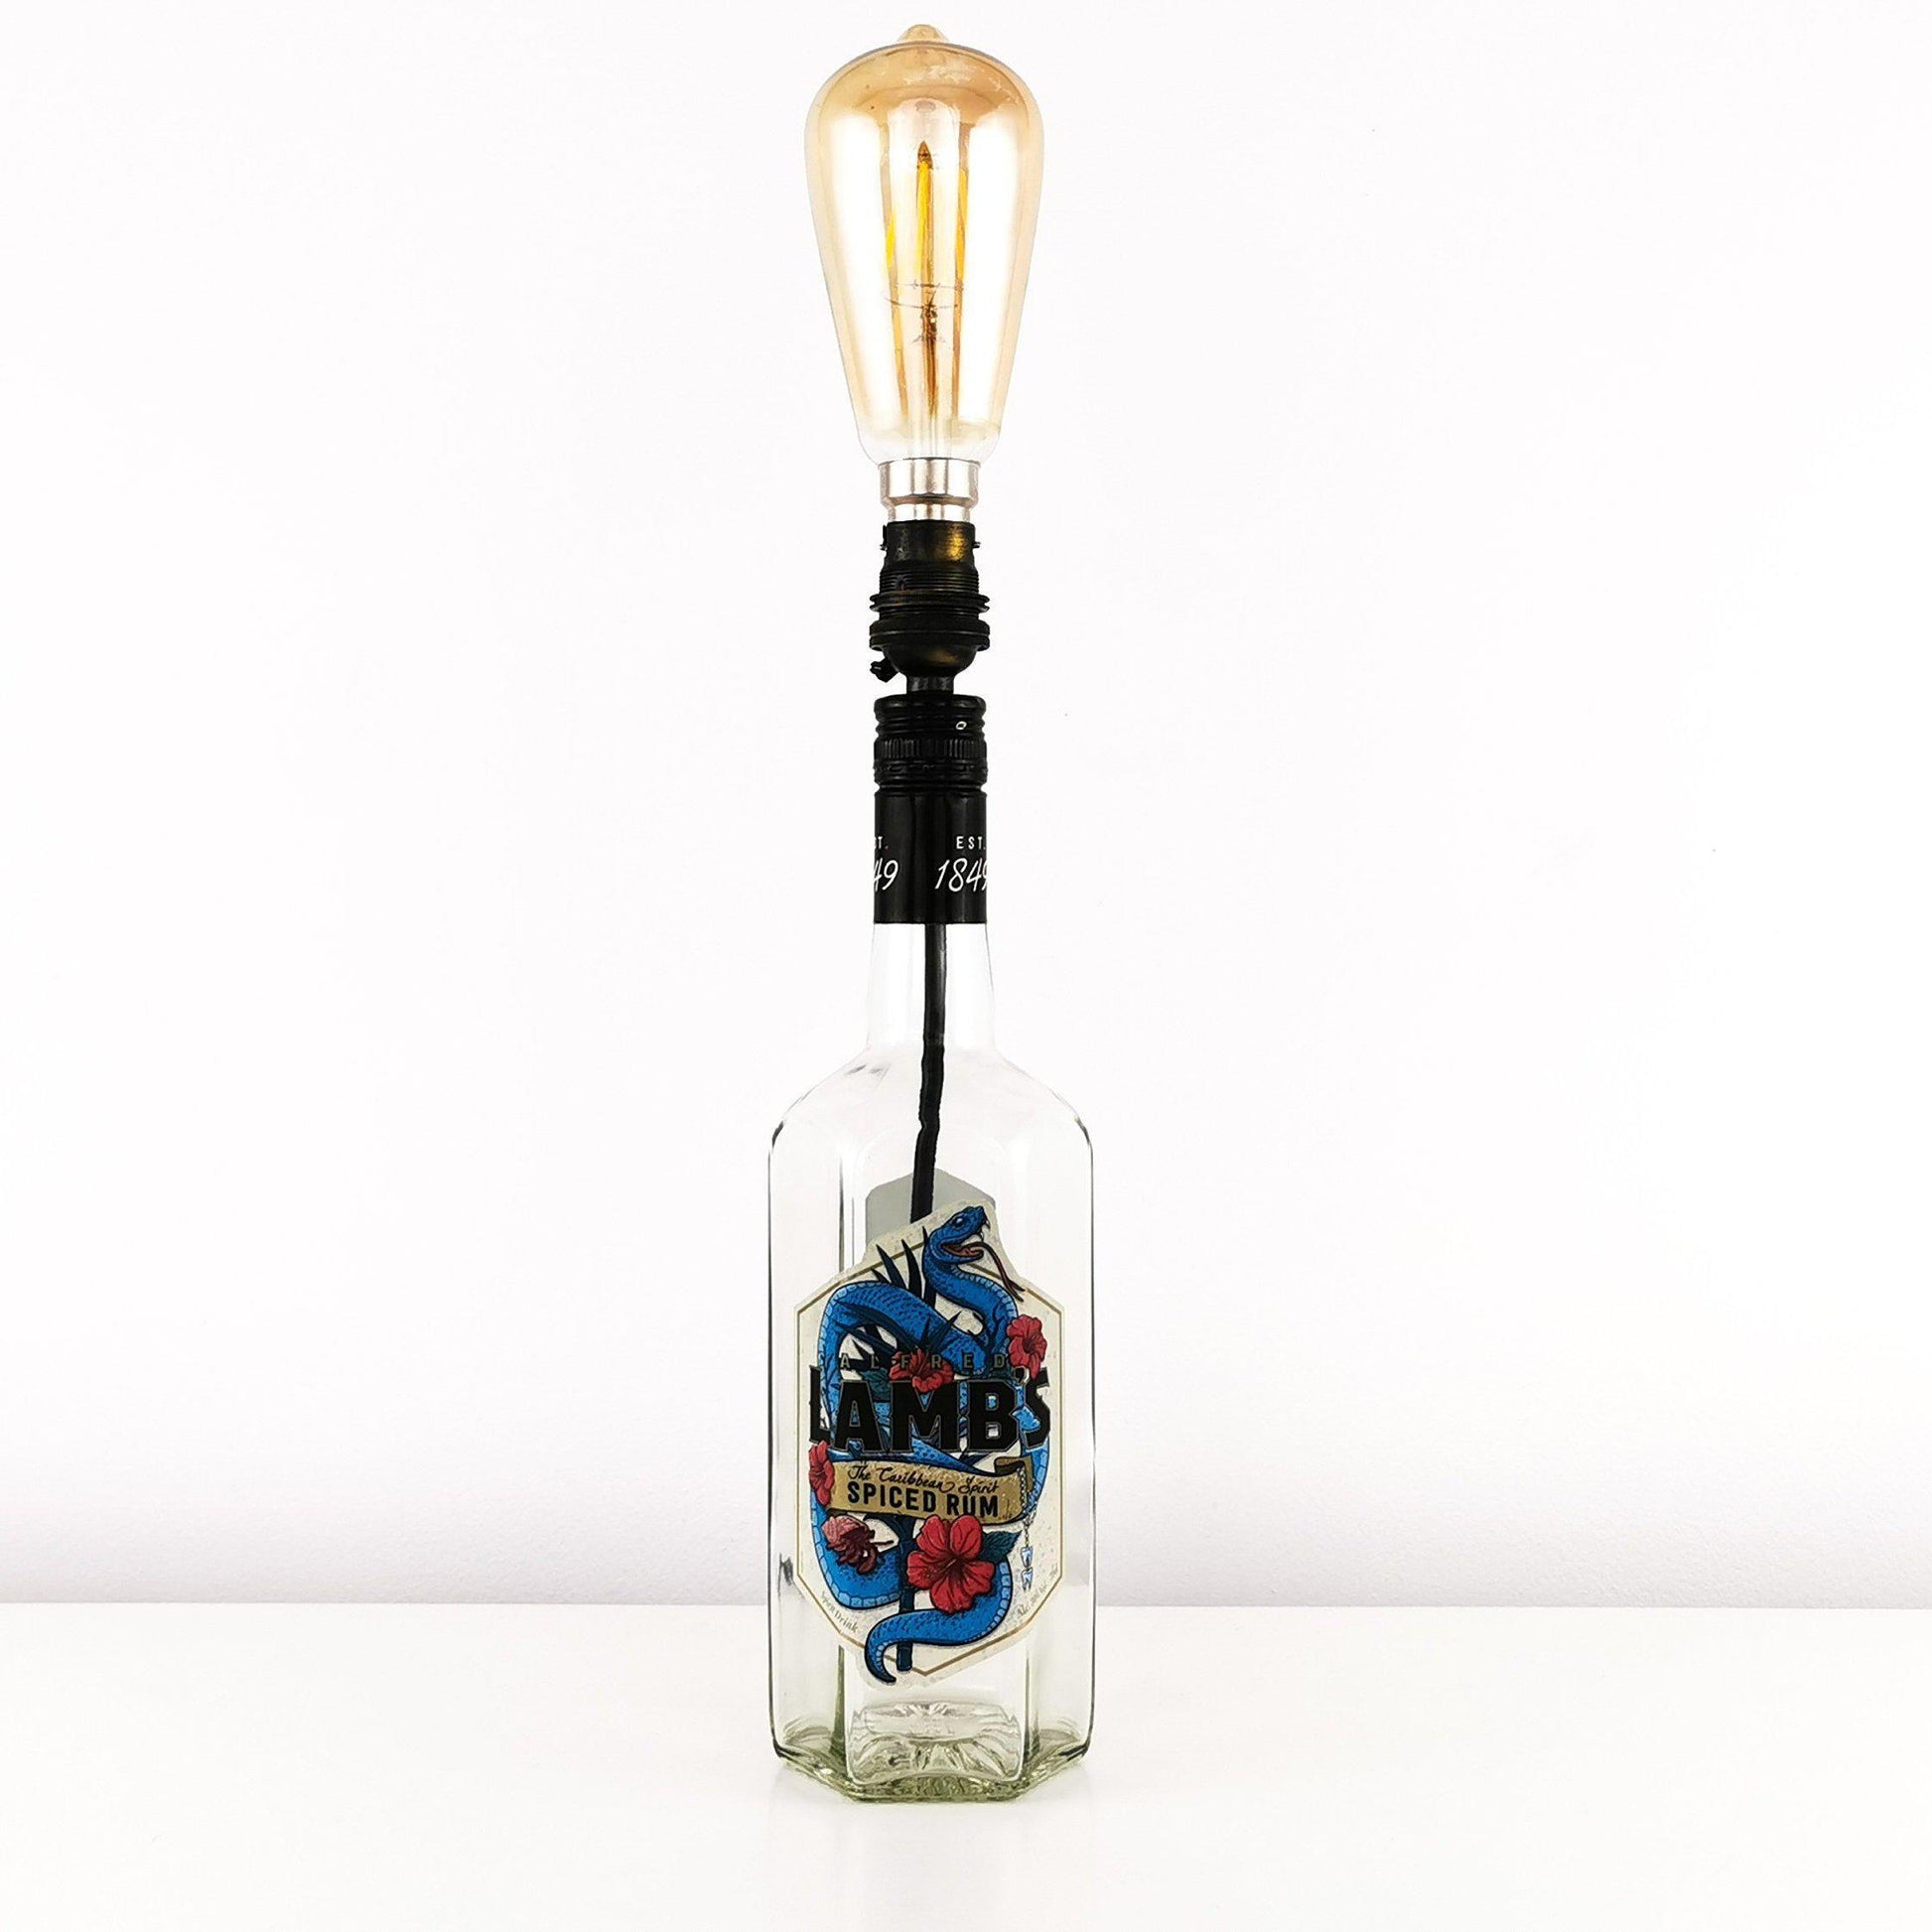 Lambs Spiced Rum Bottle Table Lamp Rum Bottle Table Lamps